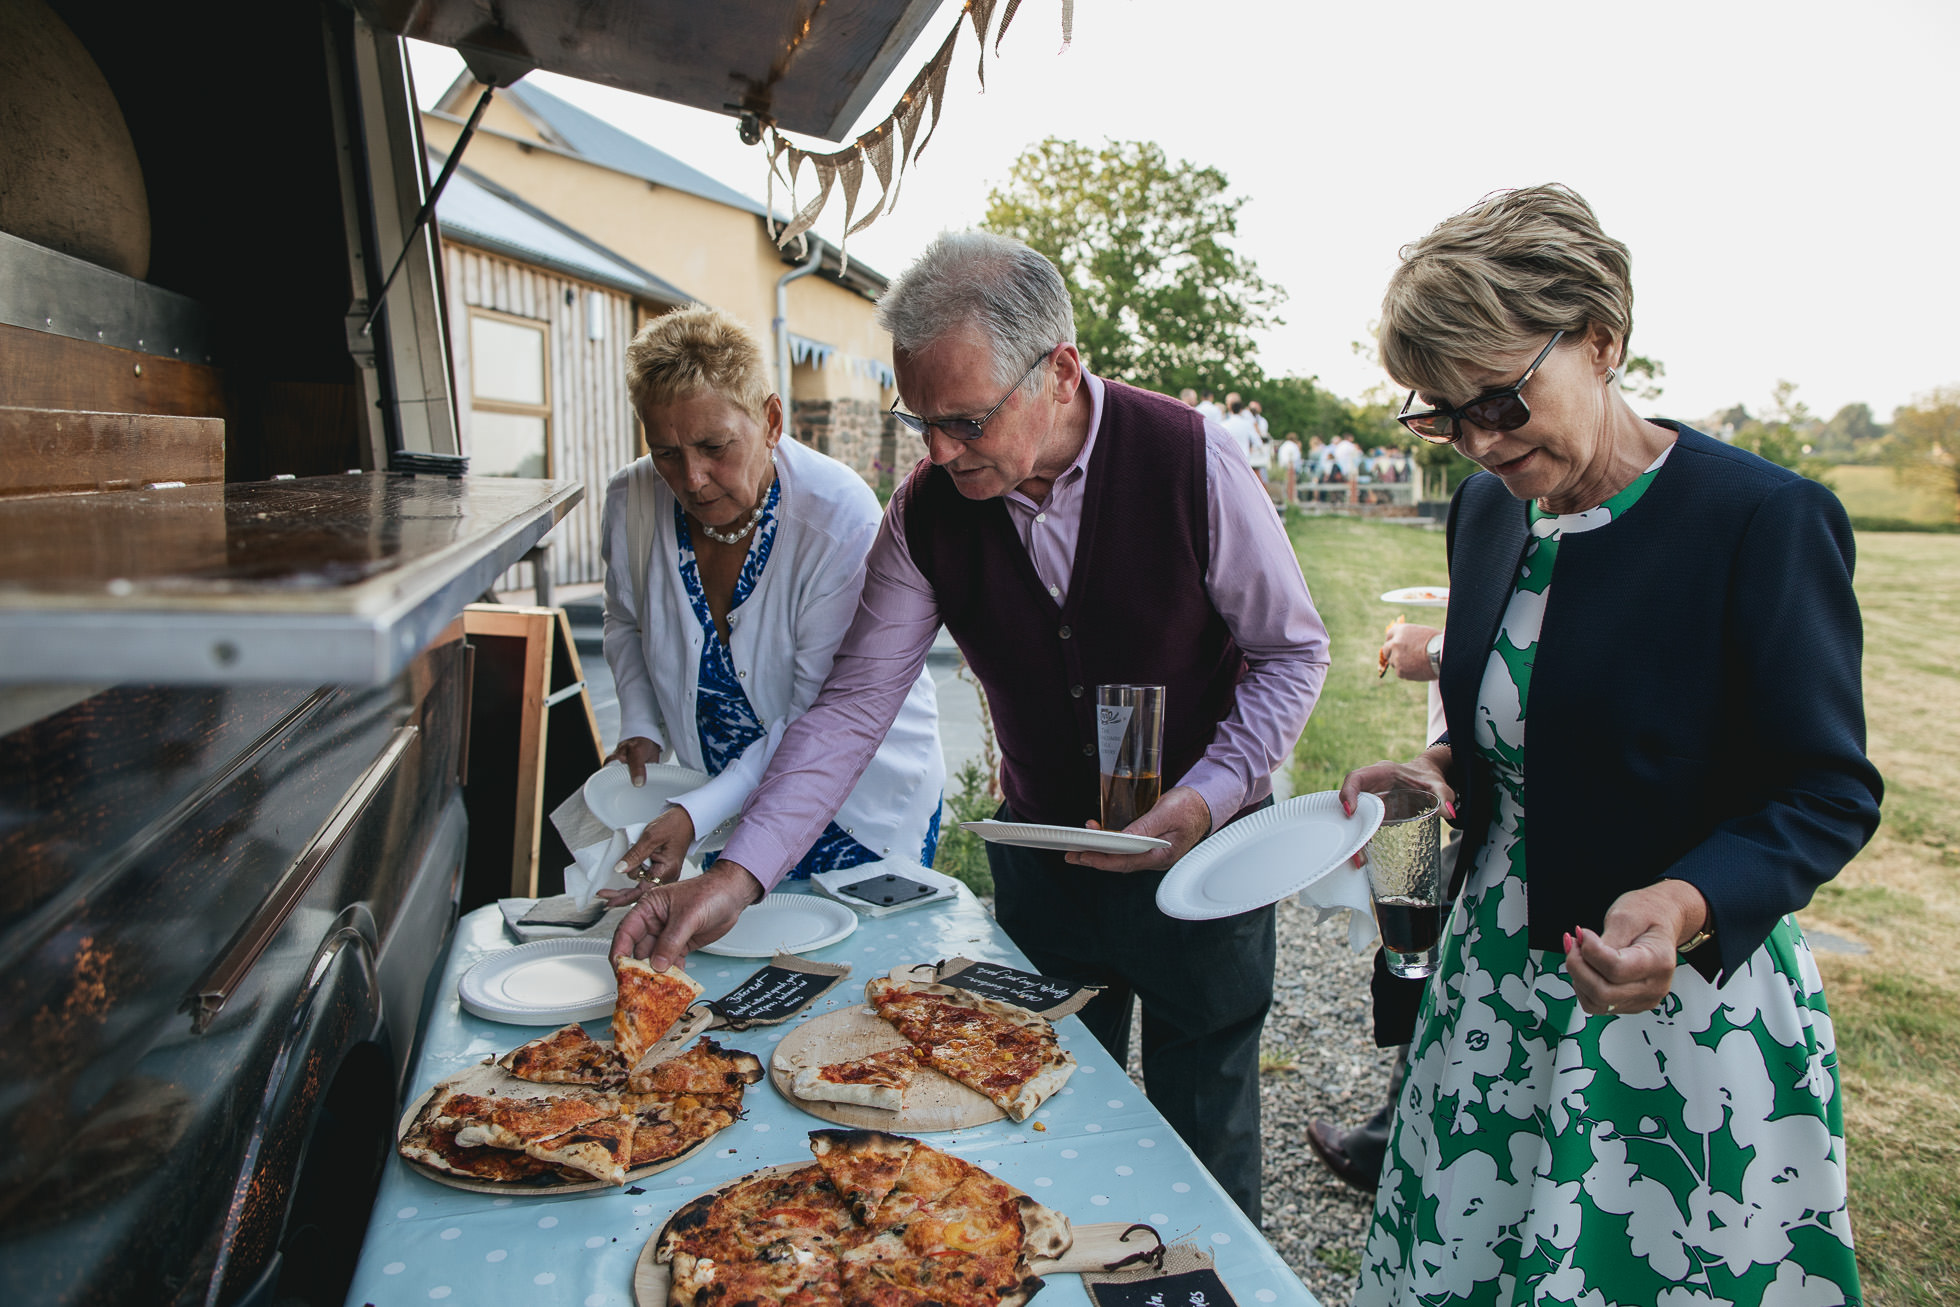 Wedding guests with stone fired pizza